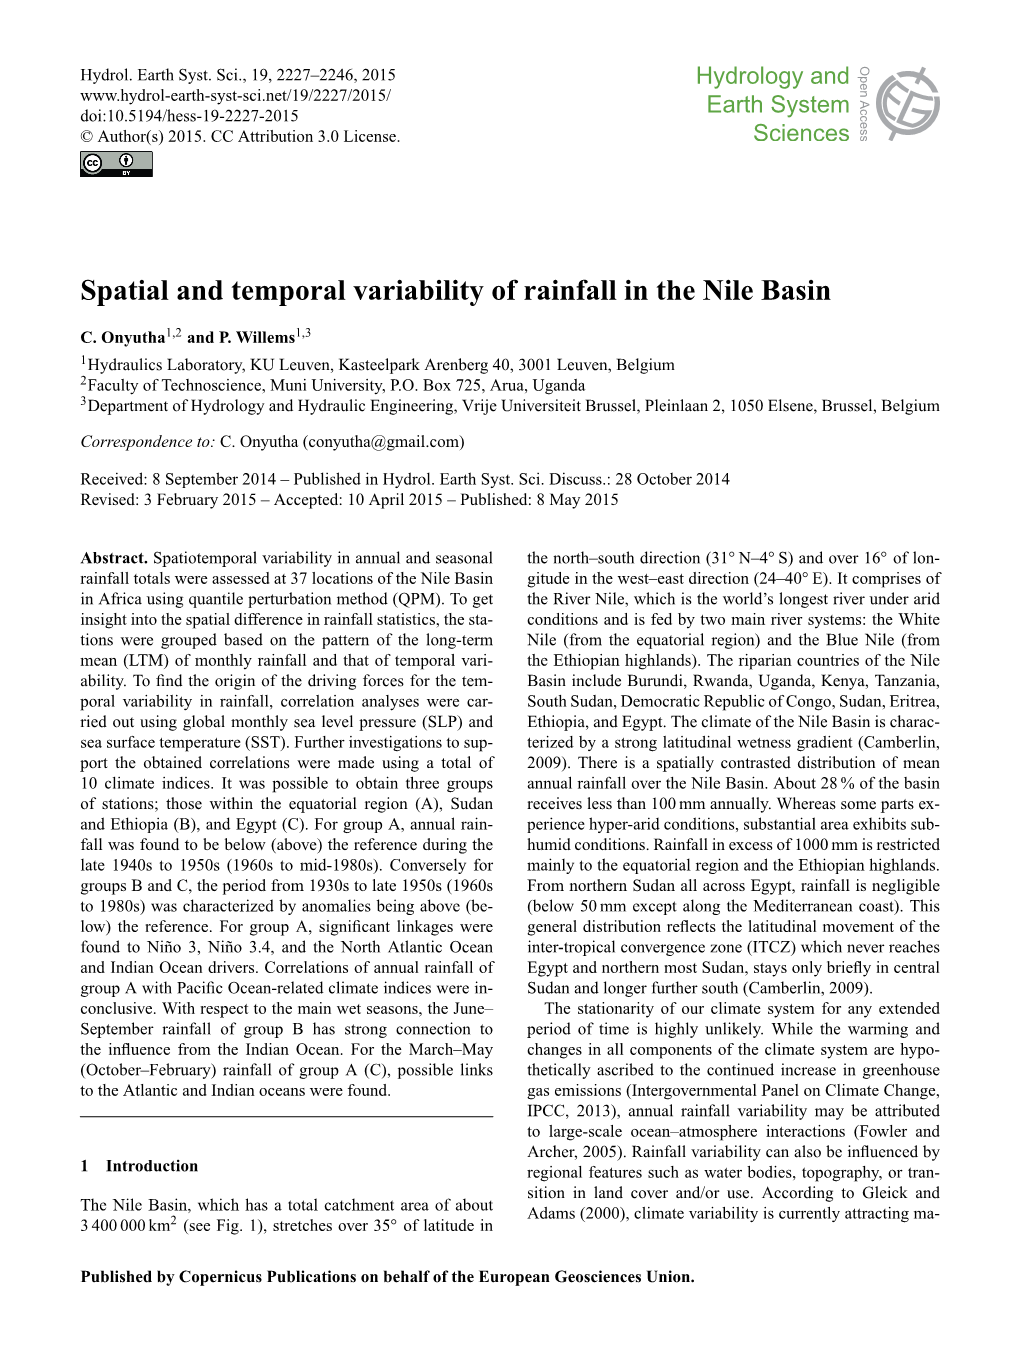 Spatial and Temporal Variability of Rainfall in the Nile Basin